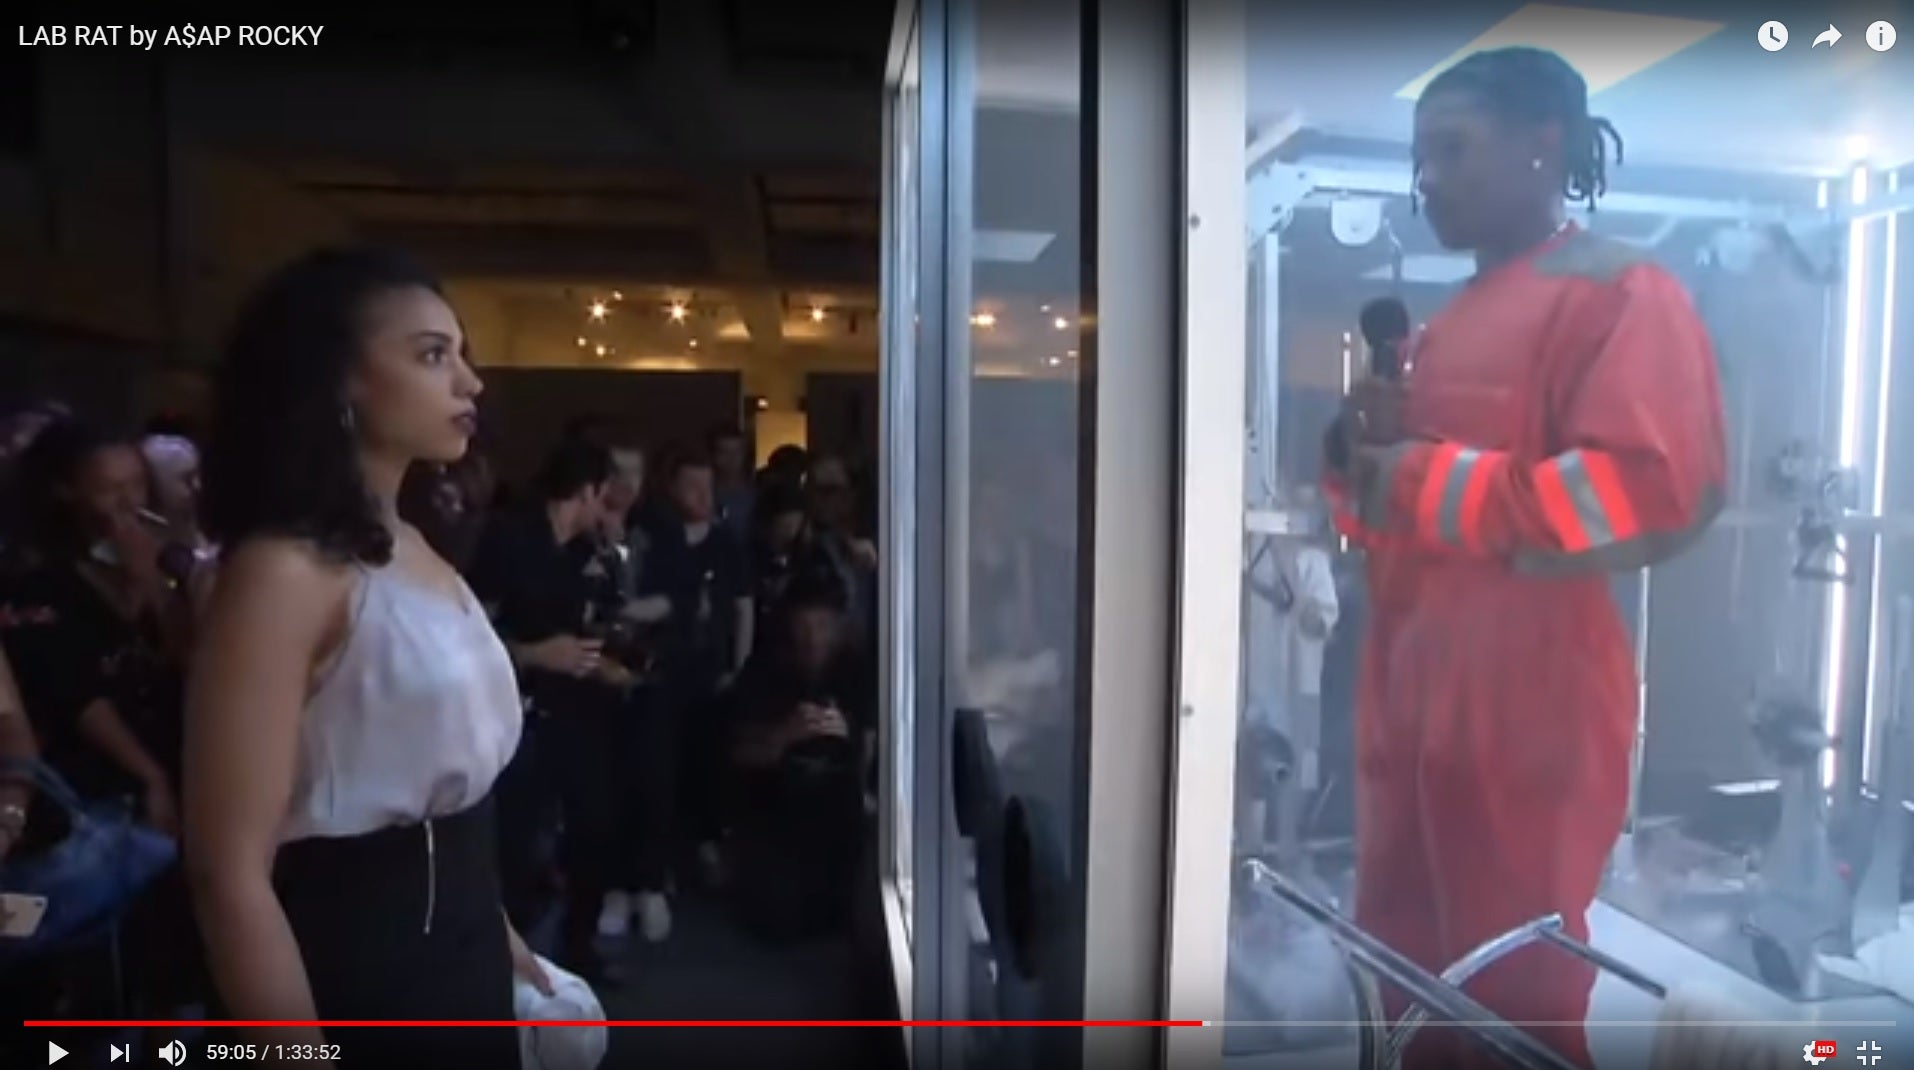 A$AP Rocky performs ‘Lab Rat’ inside a glass box, in a performance streamed on YouTube (A$AP Rocky)